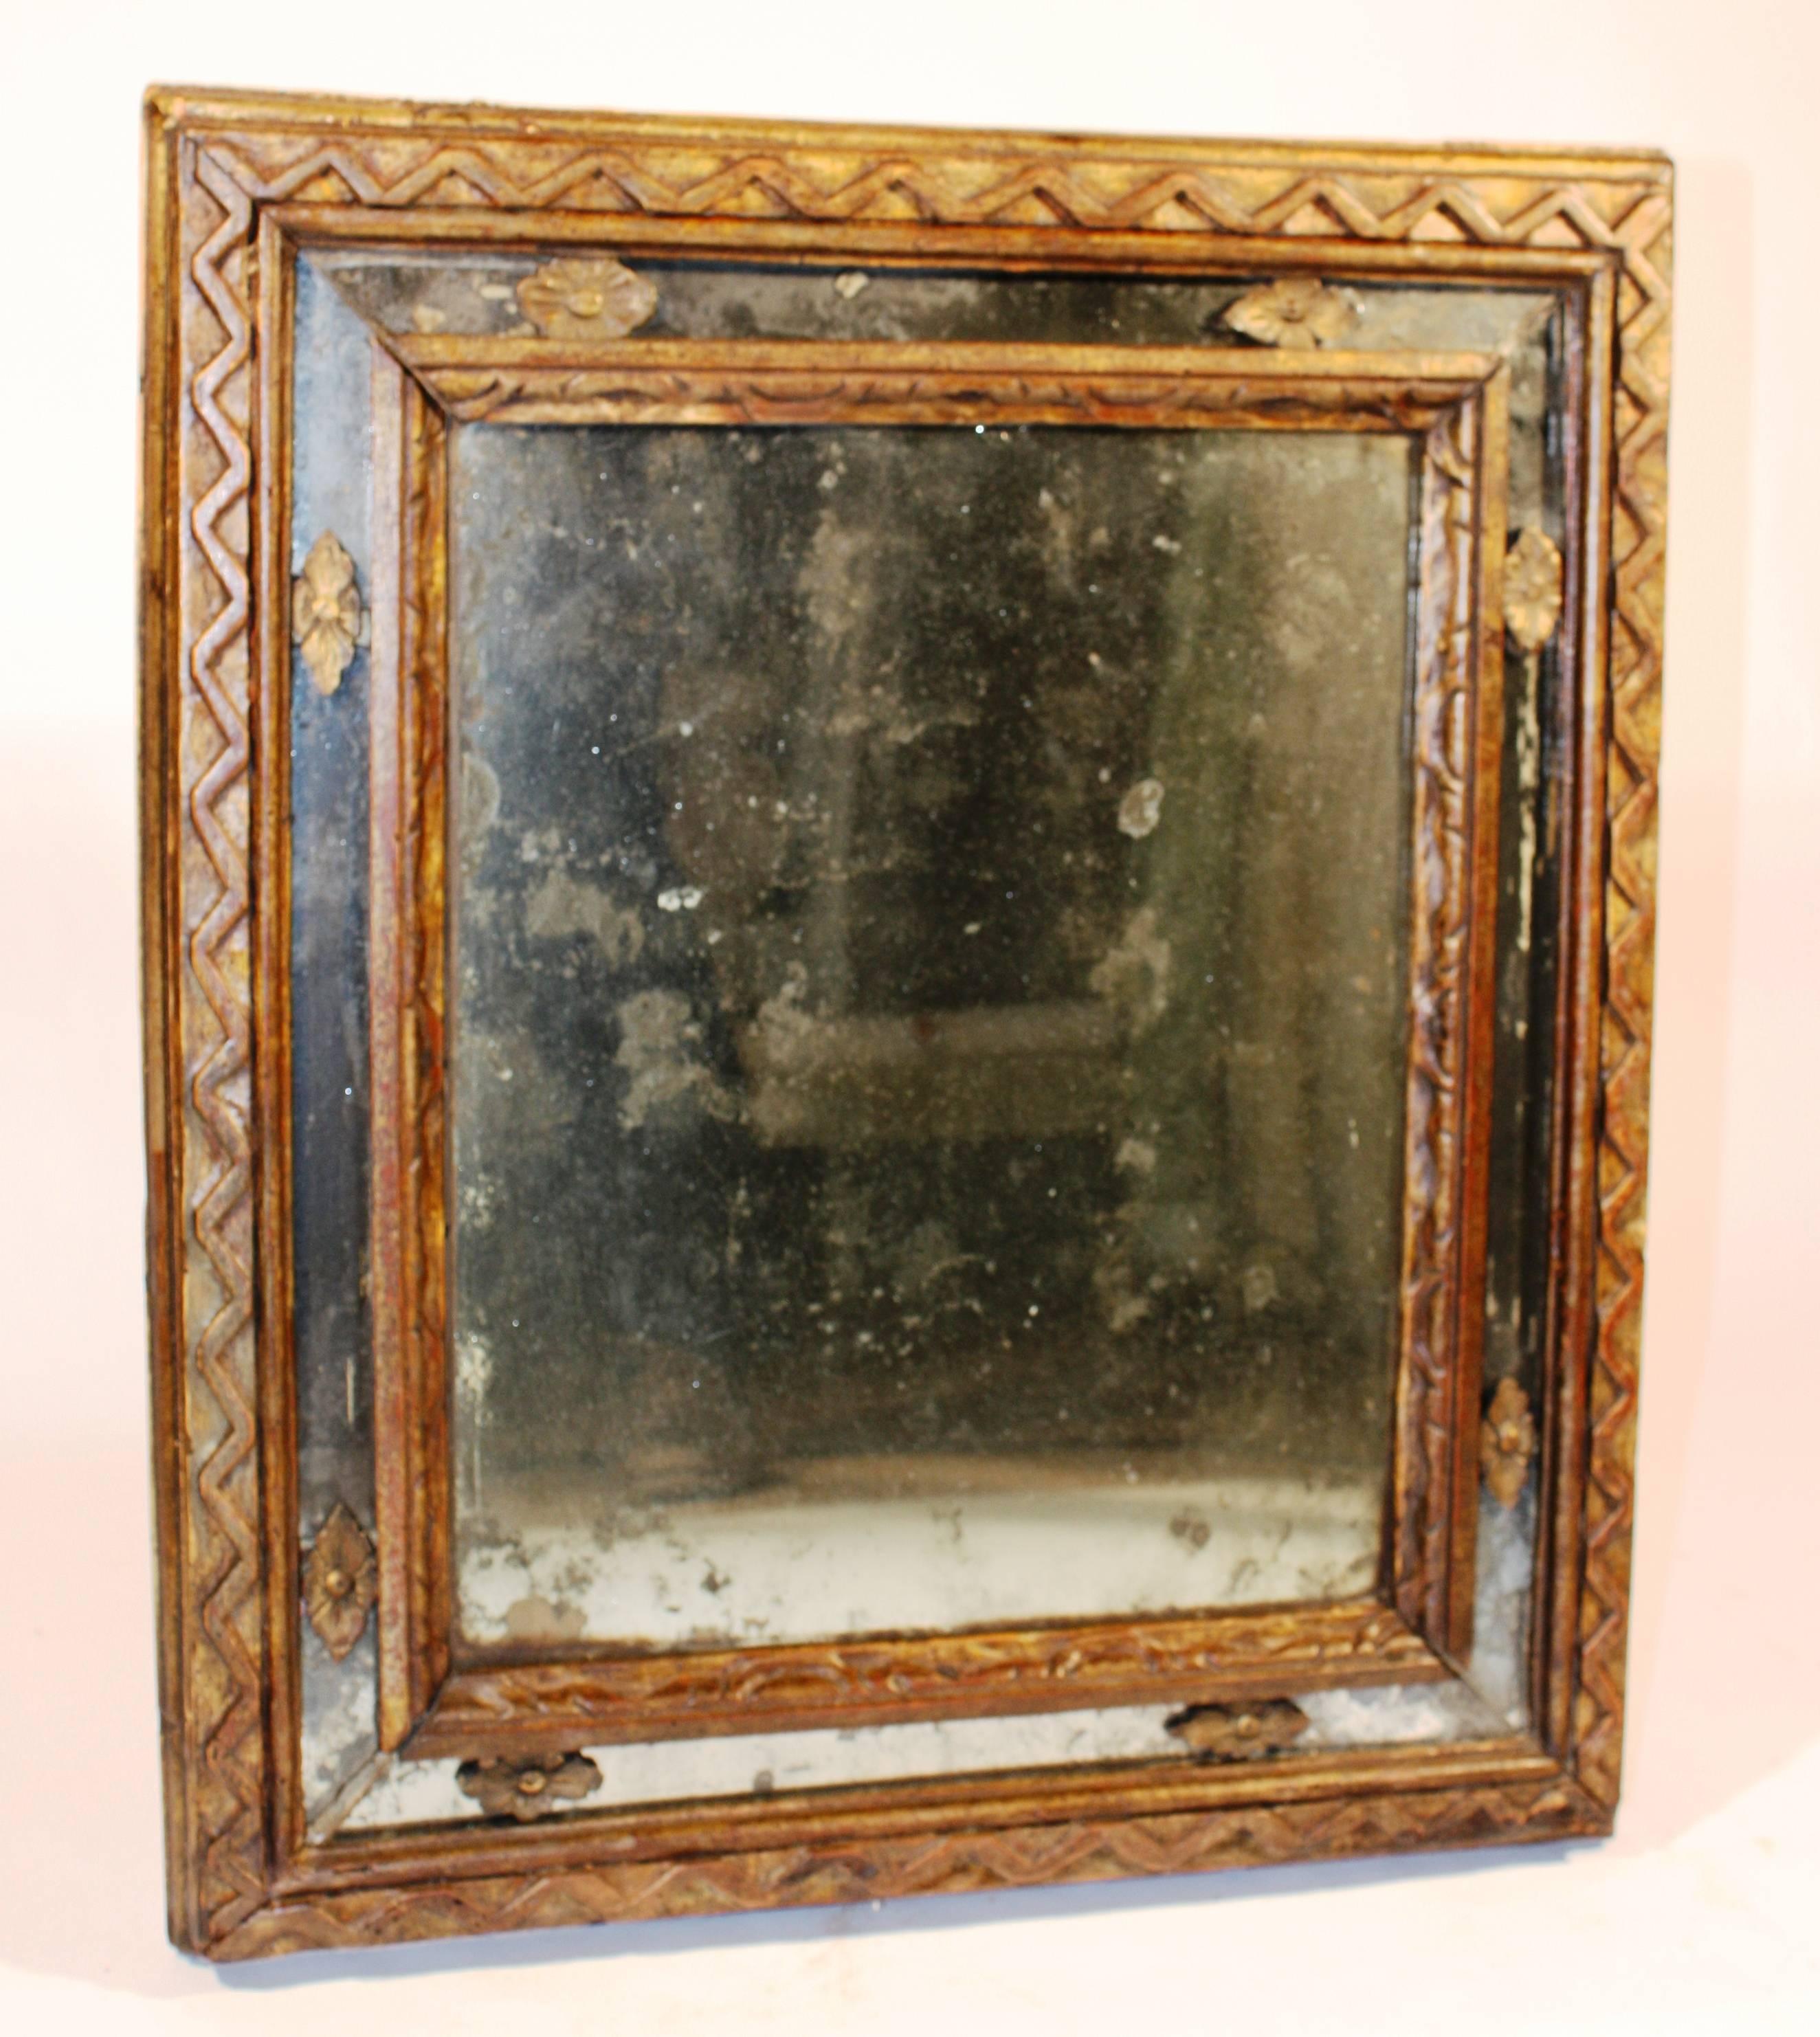 A charming 17th century Italian mirror with a giltwood frame and inset mirror panels with gilt rosettes. The gold leaf has worn through to expose the reddish brown 